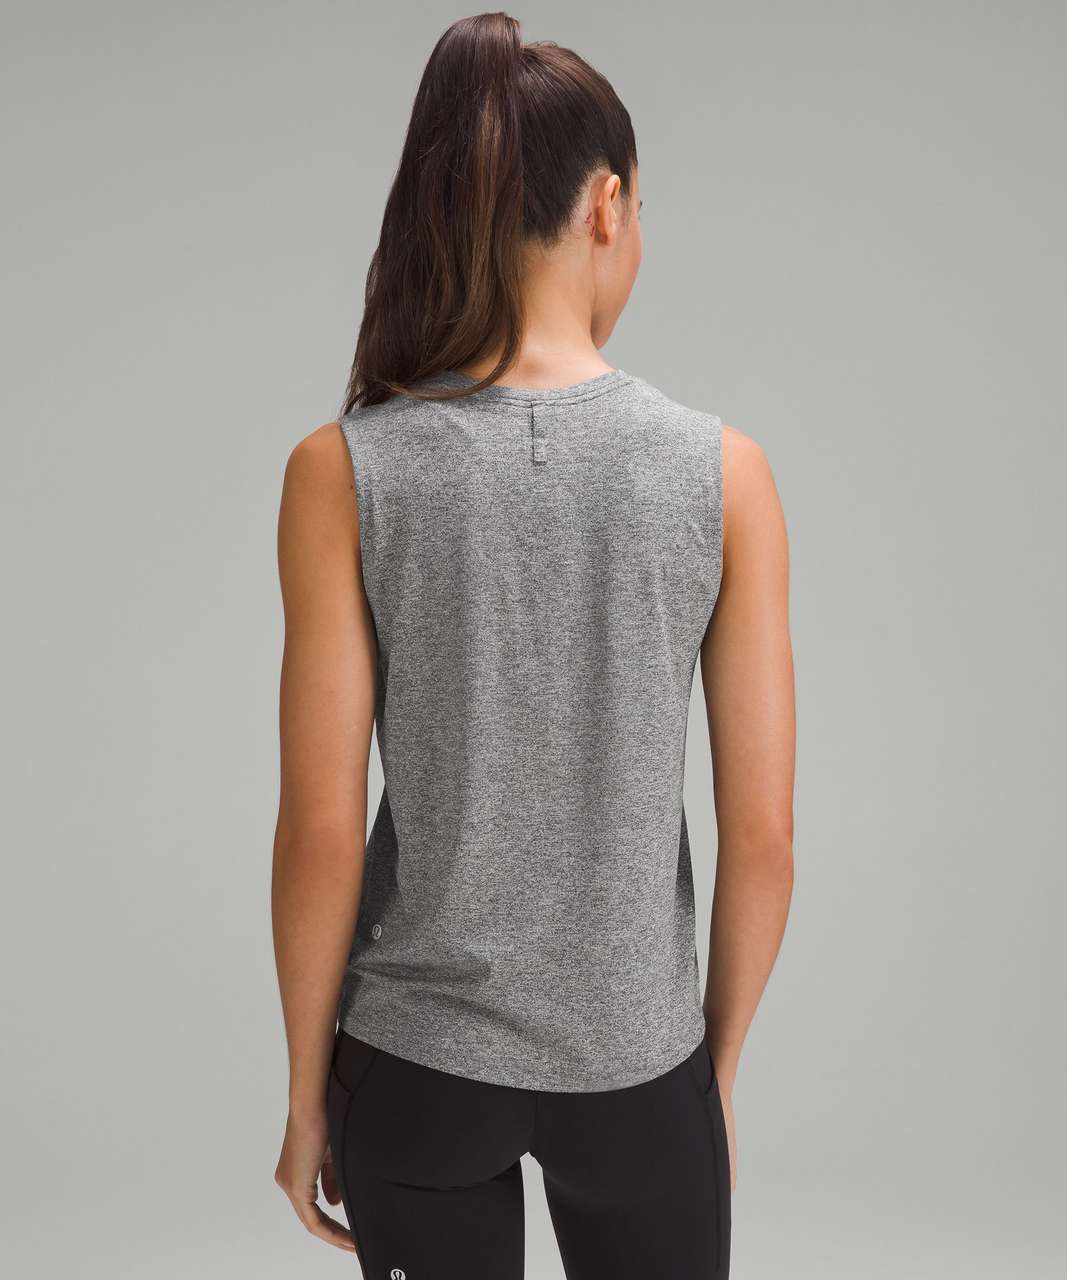 Lululemon License to Train Classic-Fit Tank Top - Heathered Black